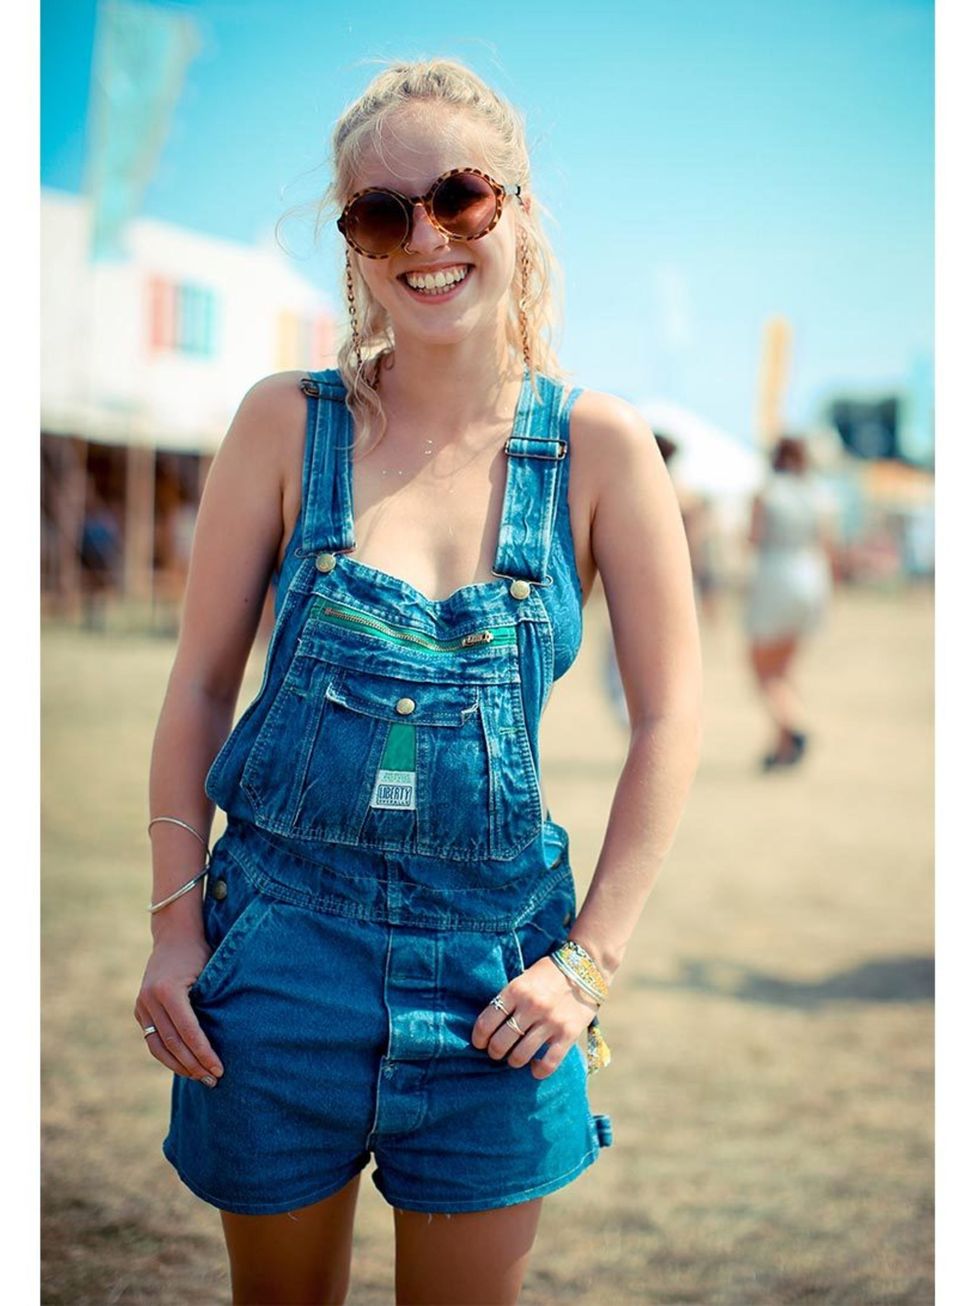 Sophie wears Liberty dungarees, ASOS sunglasses.